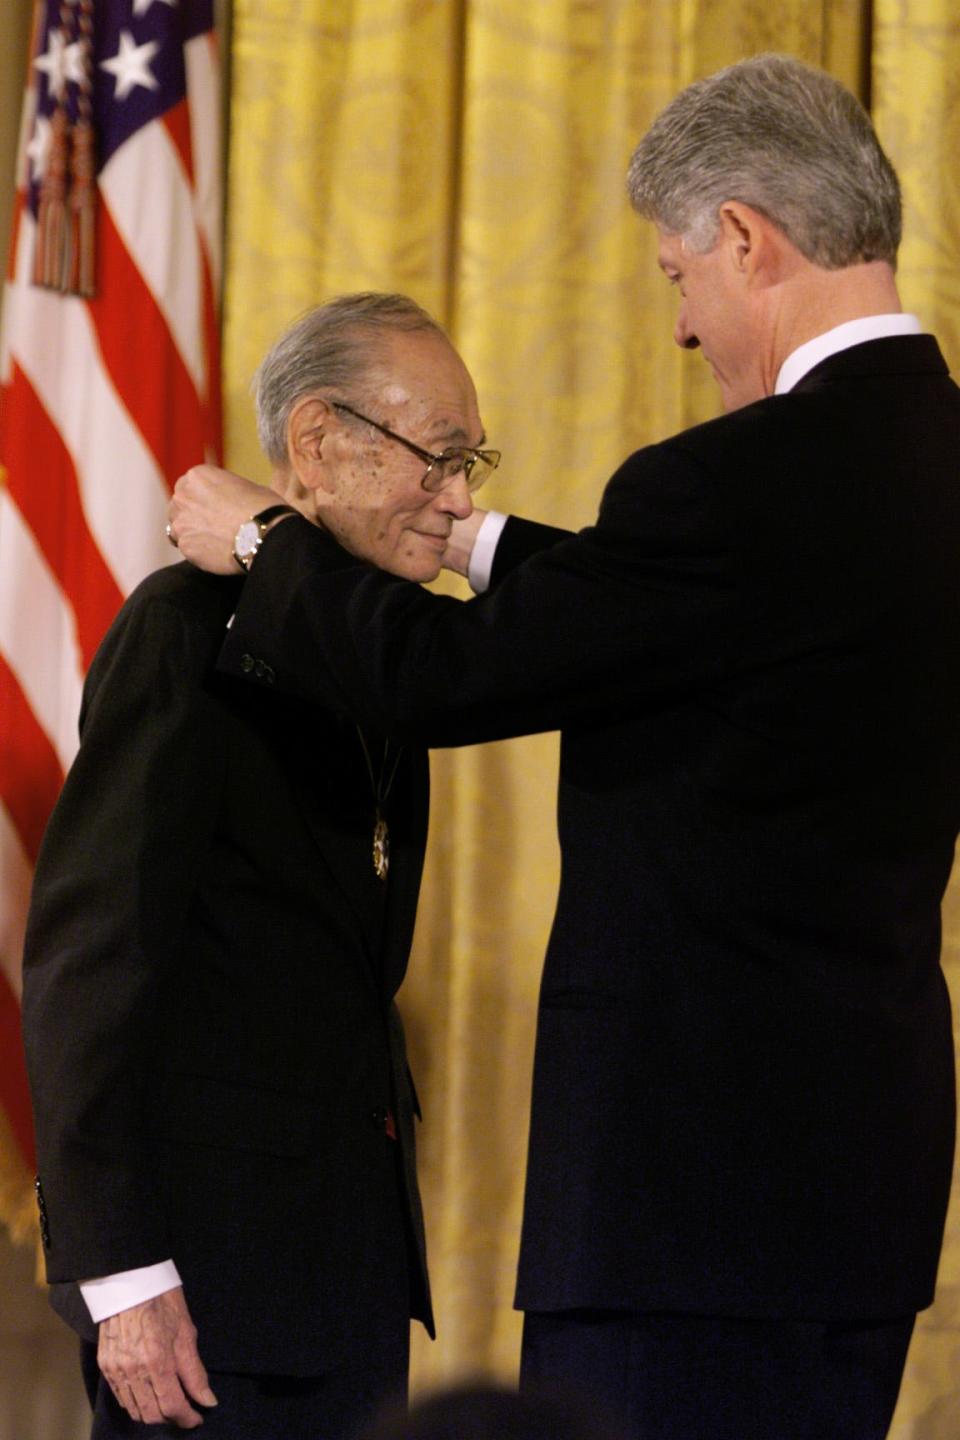 President Bill Clinton awards Fred Korematsu the the Presidential Medal of Freedom in 1998. In 1942, the 23-year-old Korematsu refused to go to incarceration camps for Japanese Americans. After he was arrested and convicted of defying the government’s order, he appealed his case to the Supreme Court.